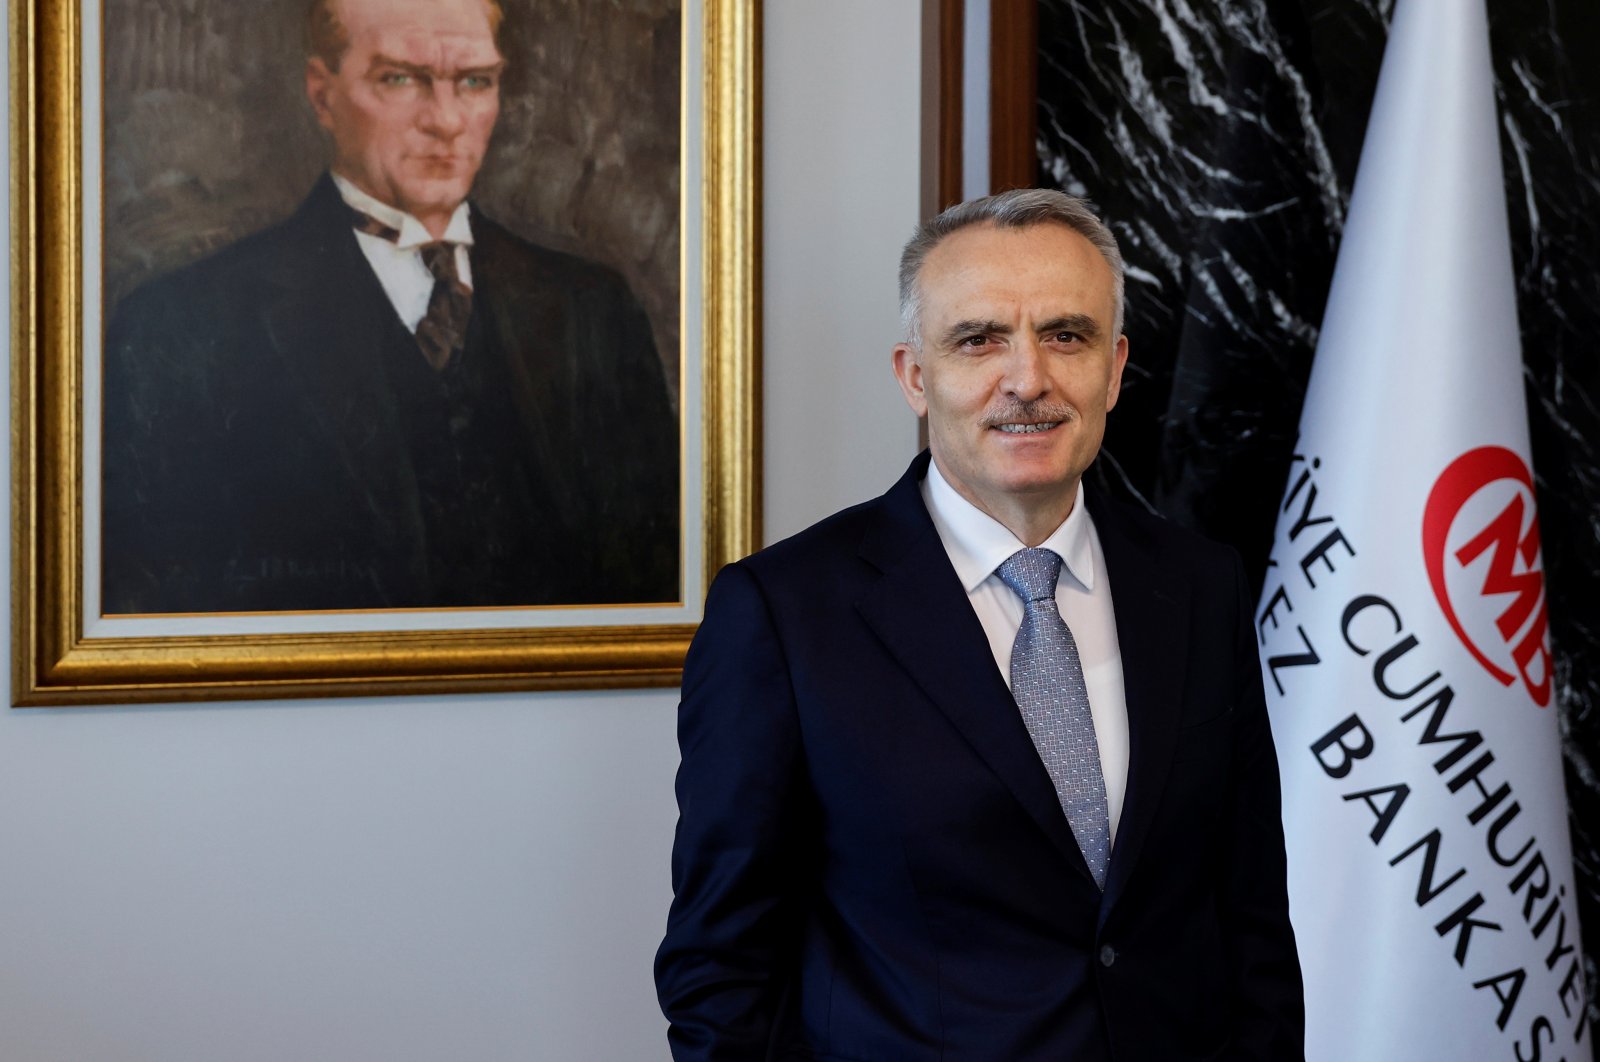 Central Bank of the Republic of Turkey (CBRT) Governor Naci Ağbal poses during an interview in his office in Istanbul, Turkey, Feb. 4, 2021. (Reuters Photo)